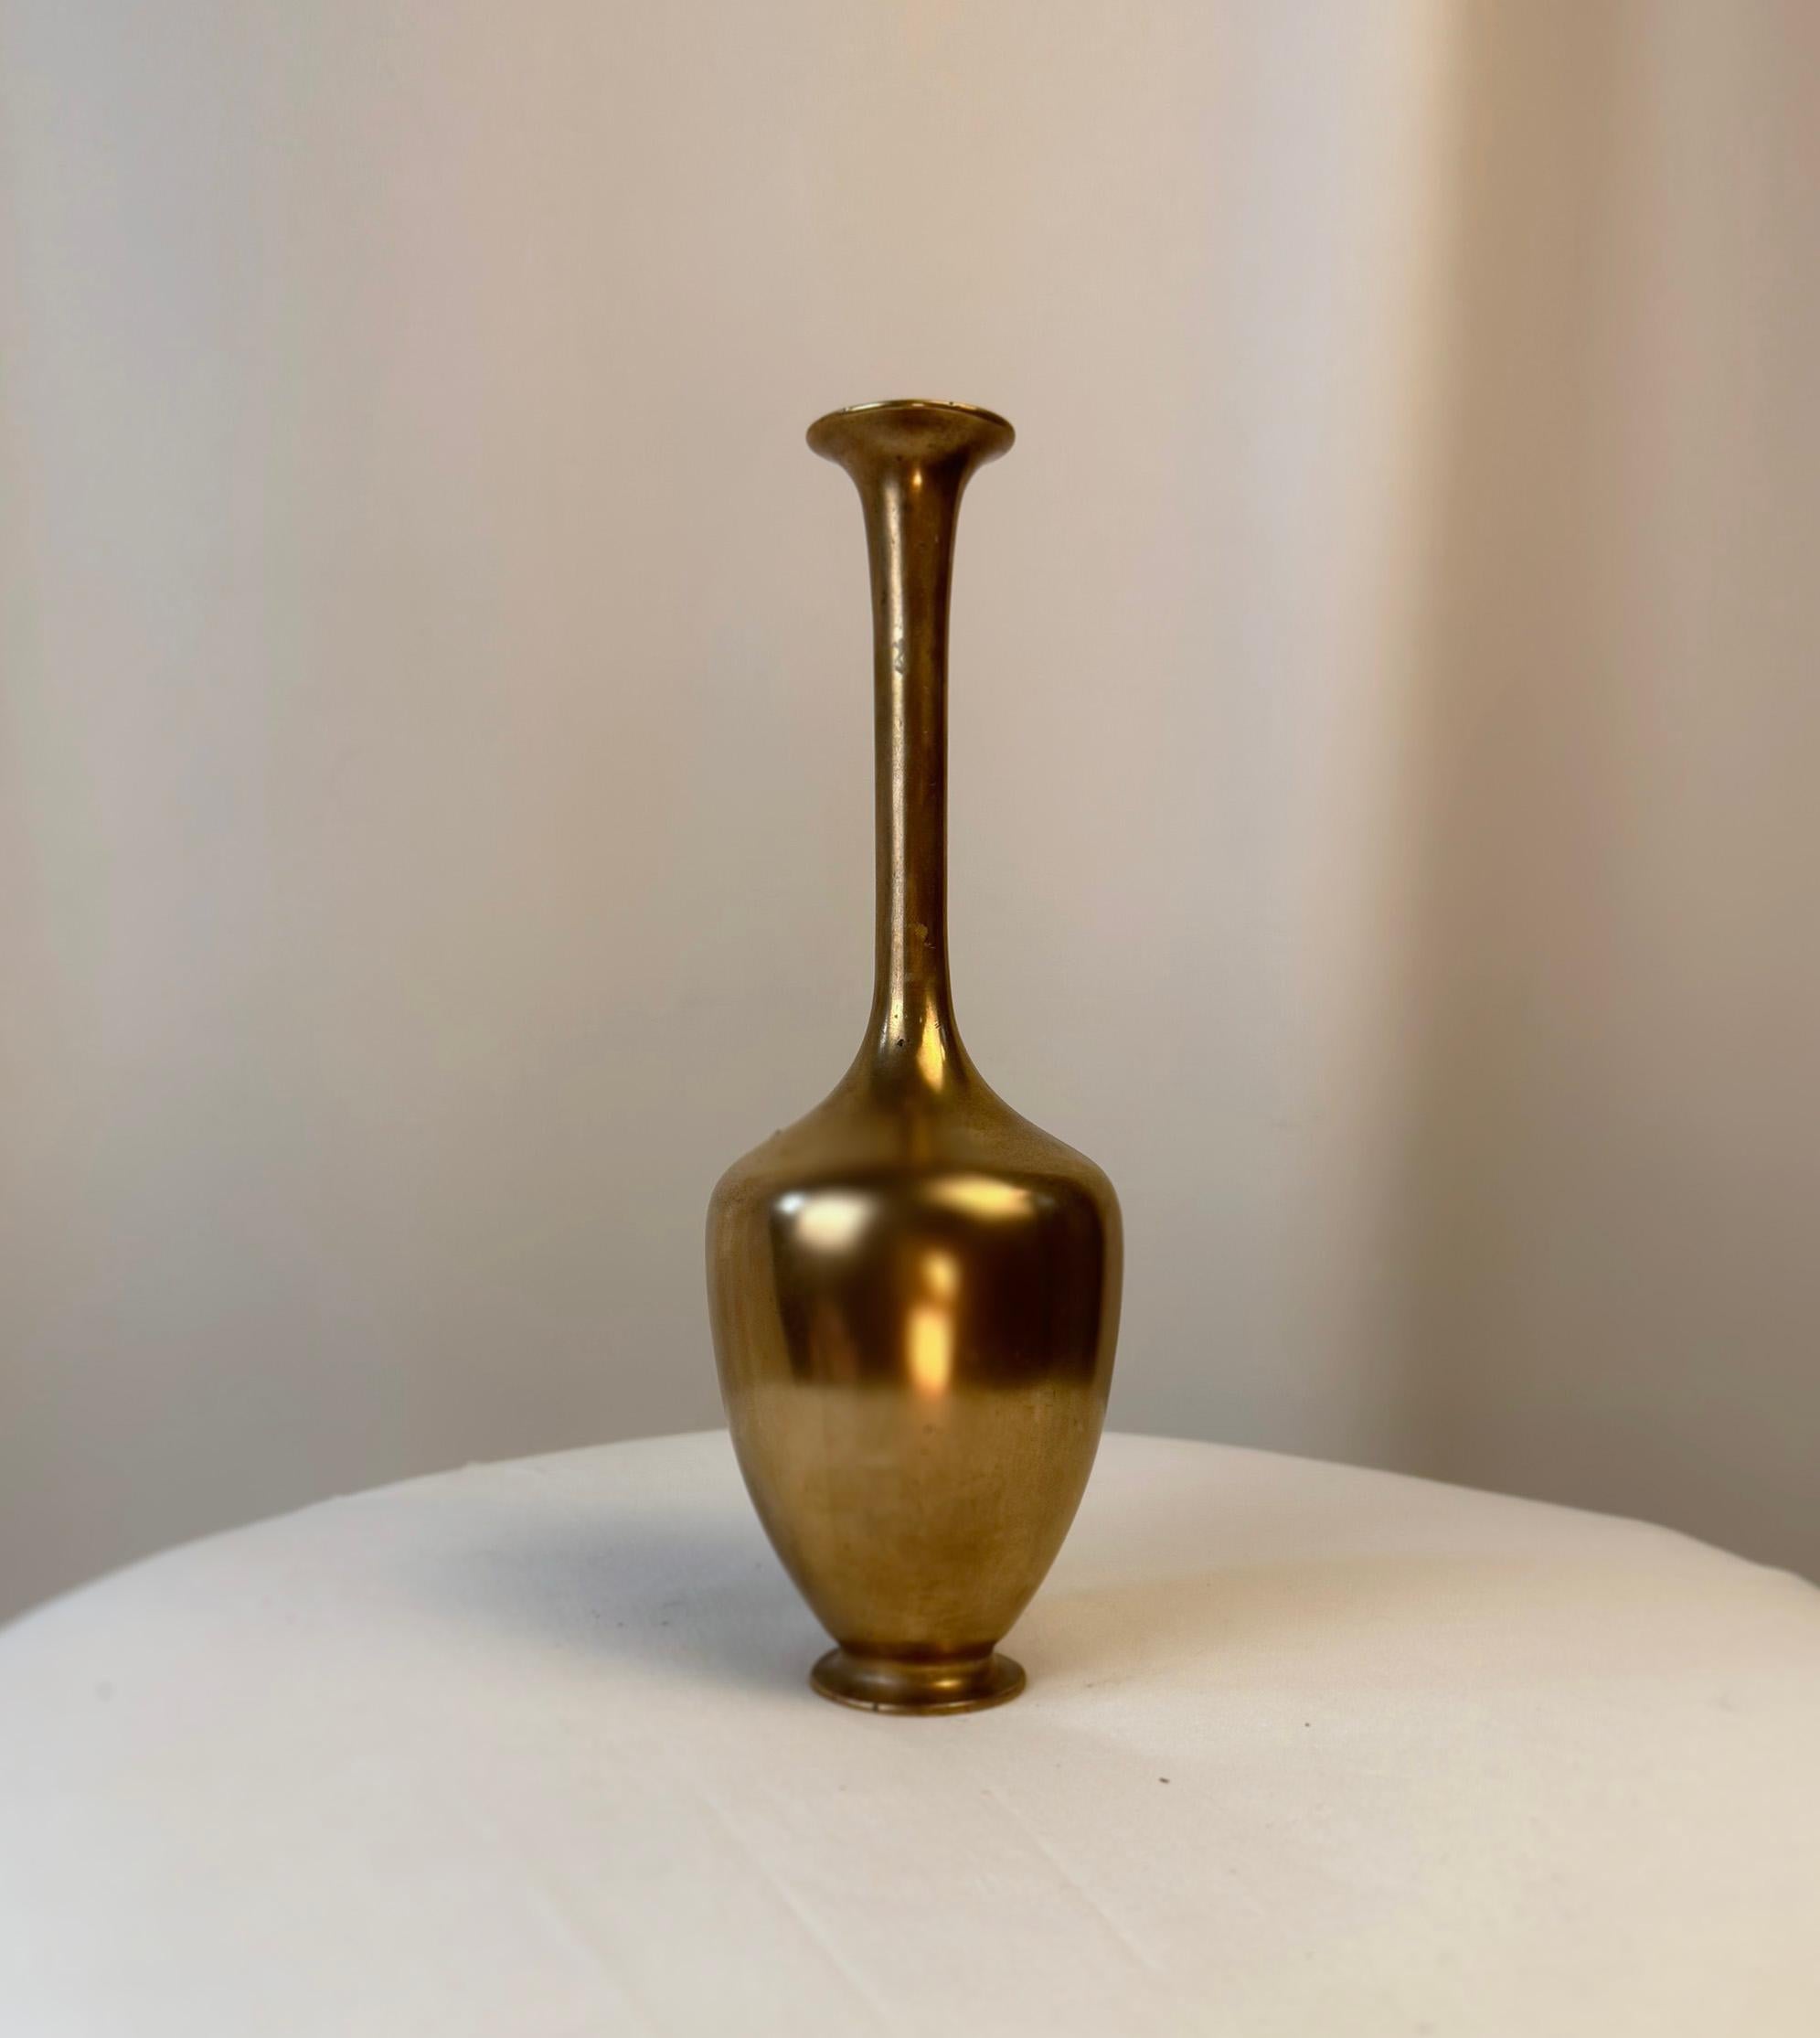 Japanese metal bud vase, created by the renowned artisan Genryusai Seiya.

This exquisite vase is a testament to the refined craftsmanship of the Meiji era, a period known for its artistic flourishing in Japan. Crafted from copper, this diminutive